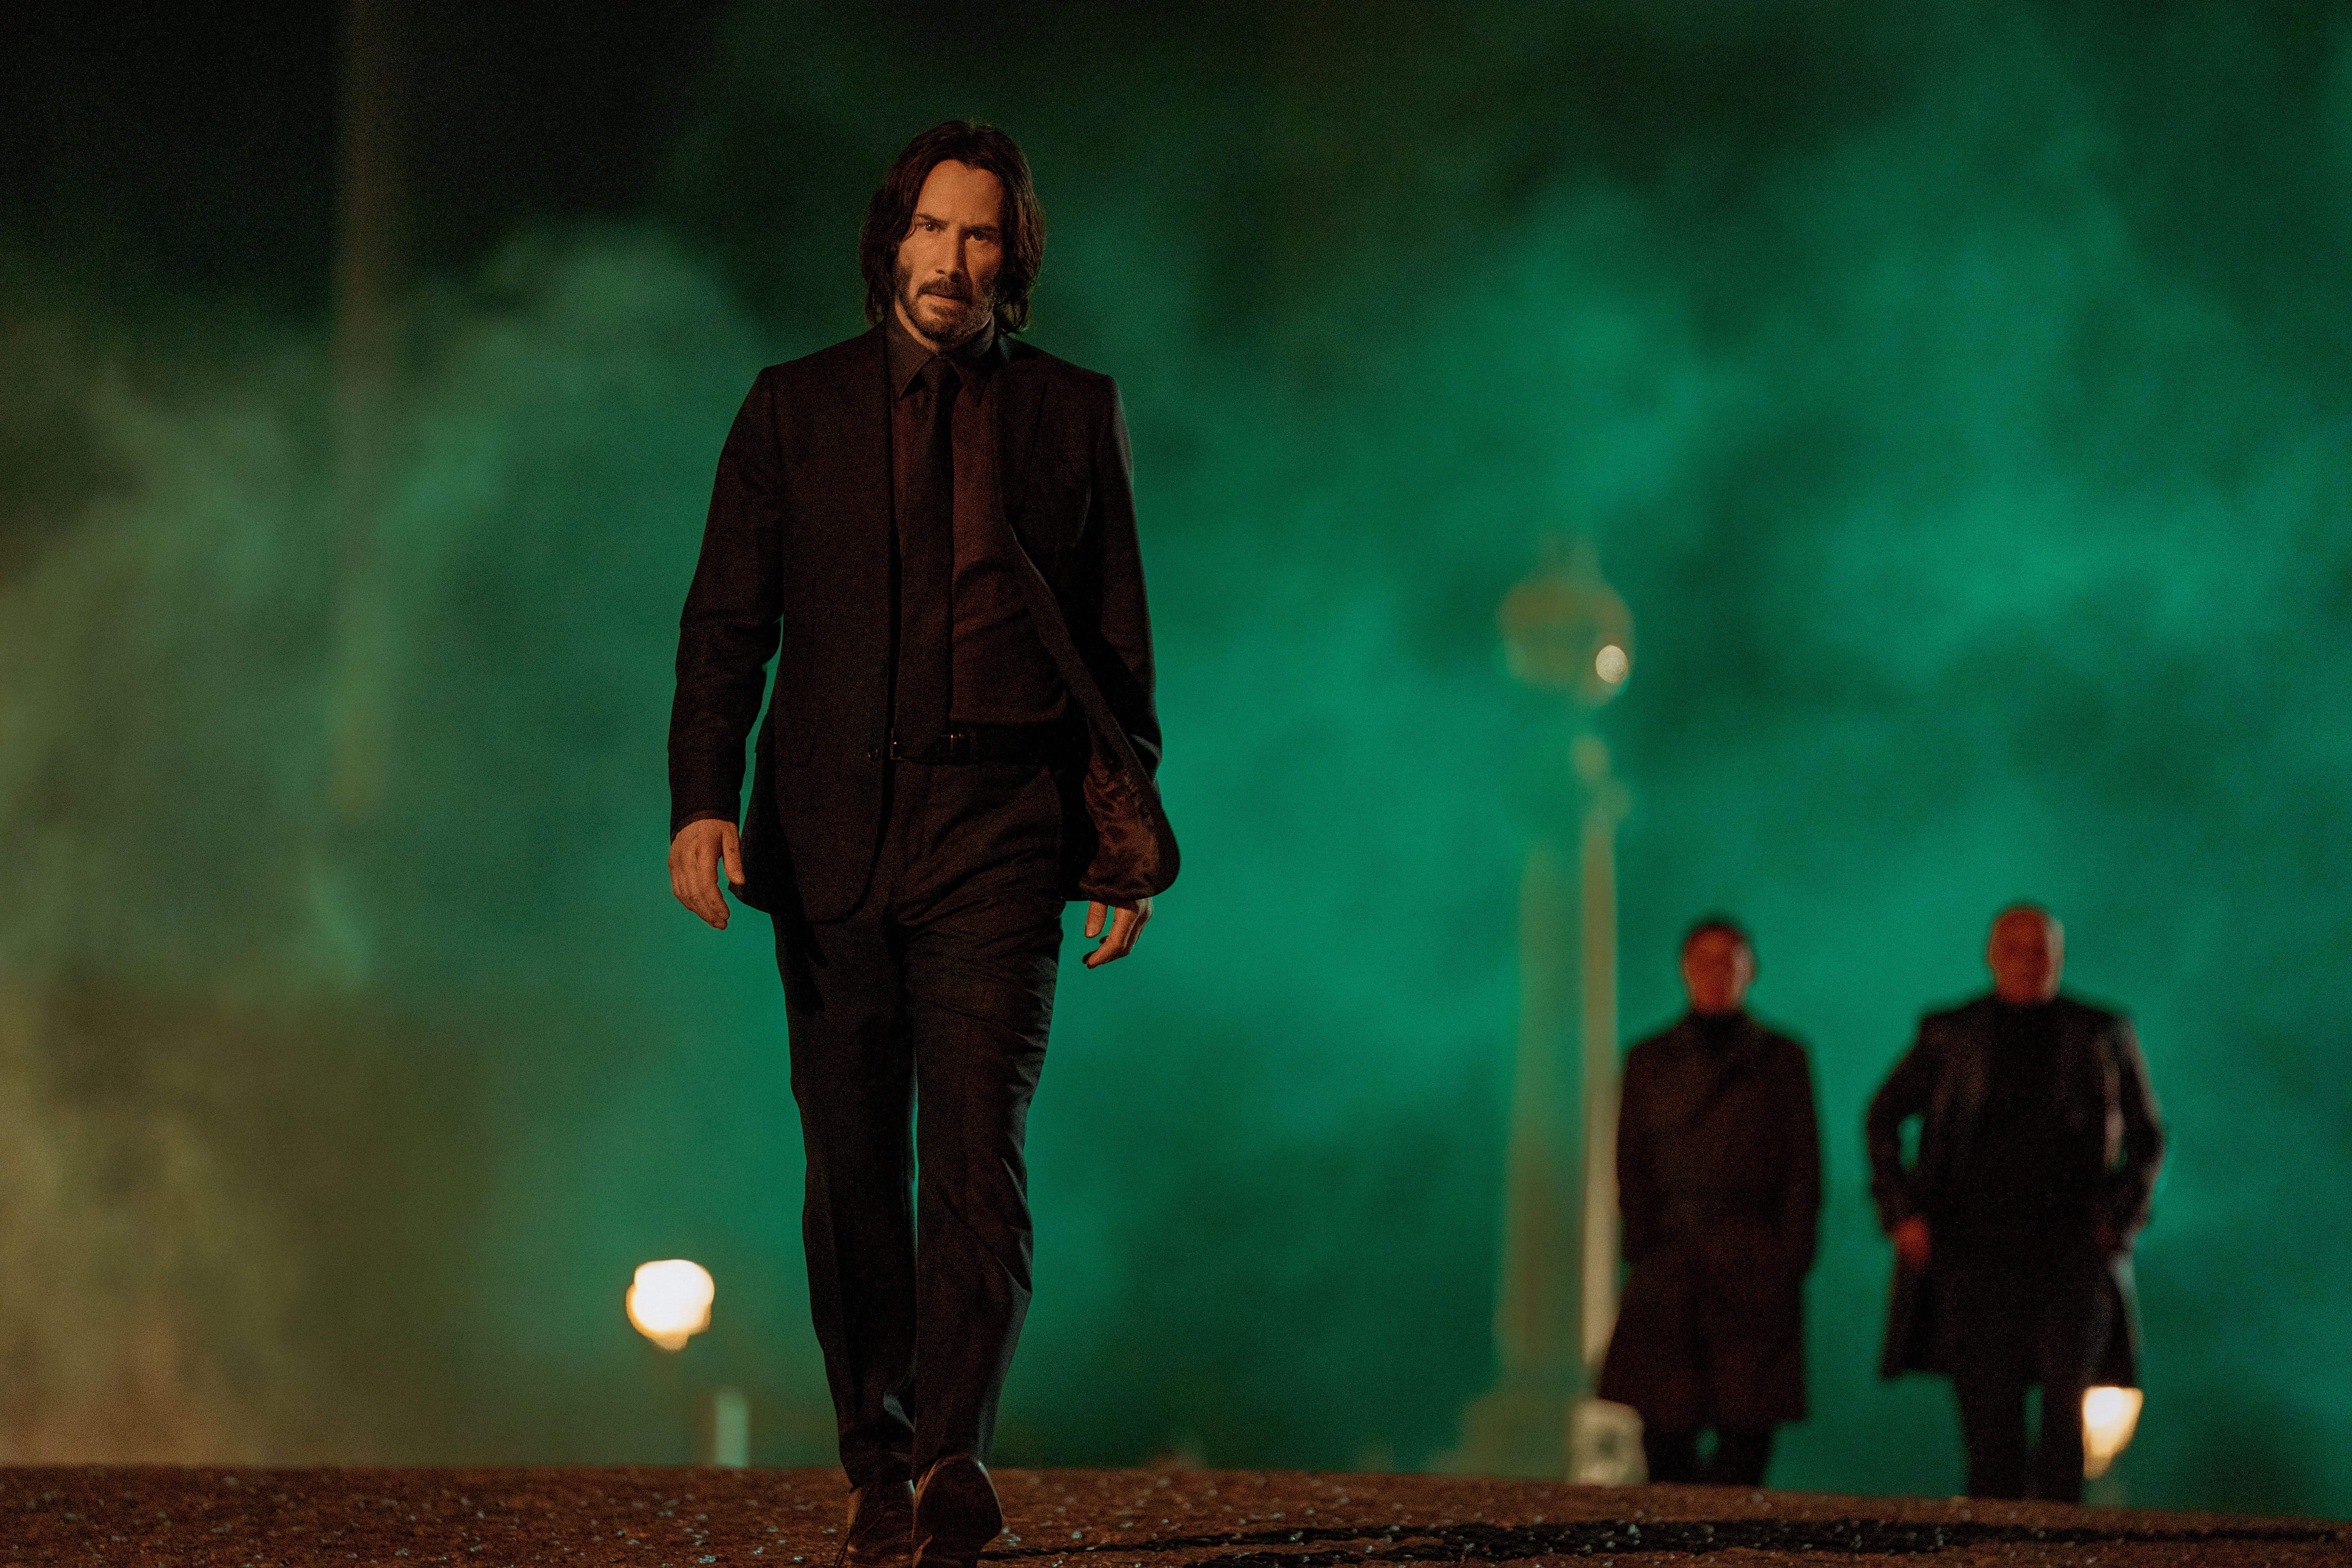 Keanu Reeves shares details on new John Wick spinoff starring Ana de Armas   Hollywood  Hindustan Times